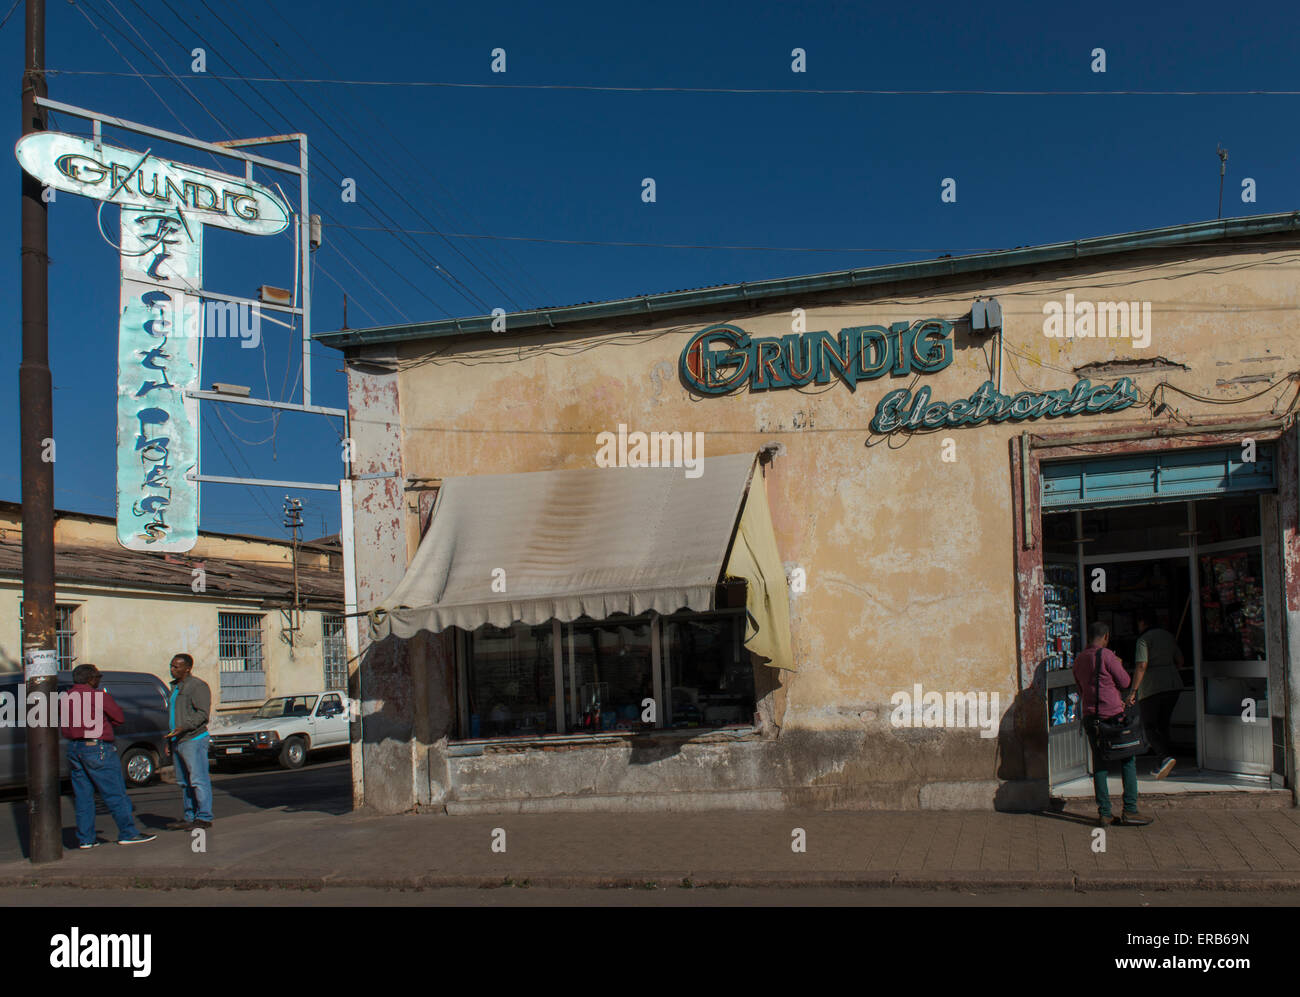 A Commercial Street With The Once Famous Grundig Brand, Asmara Stock Photo